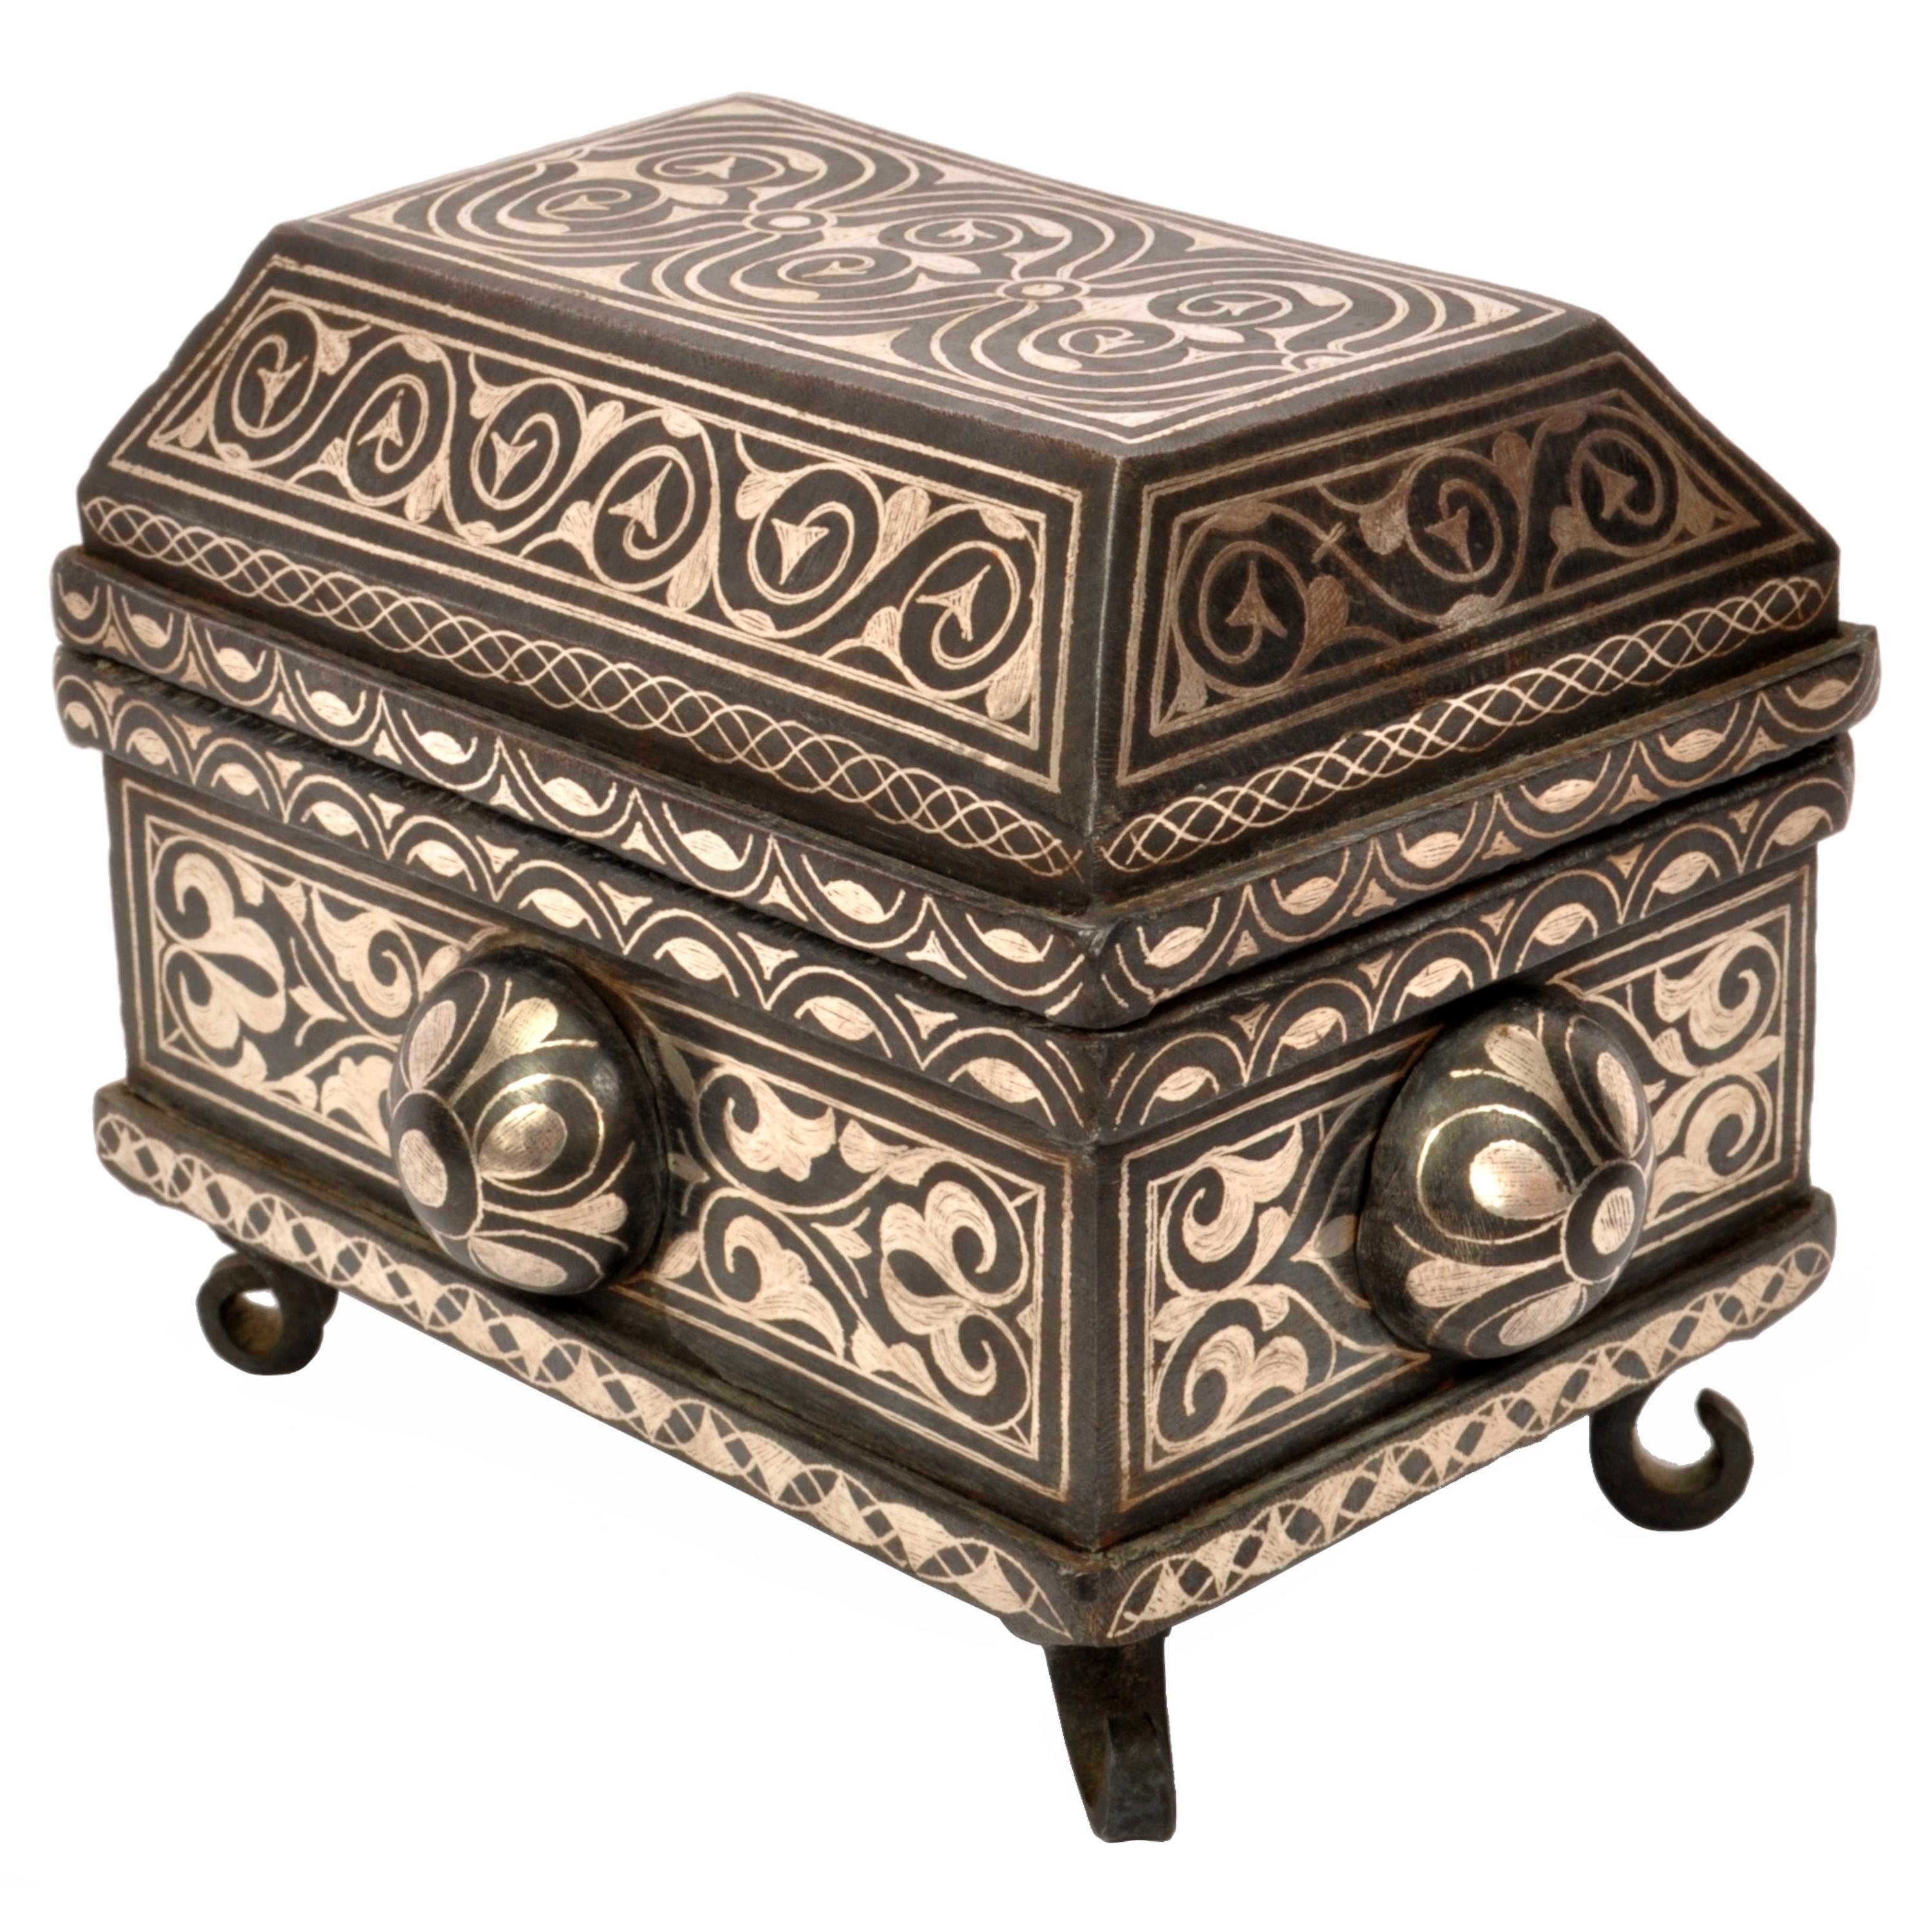 Hand-Crafted Antique 19th Century Indian Bidriware Pandan Silver & Brass Casket Jewelry Box  For Sale